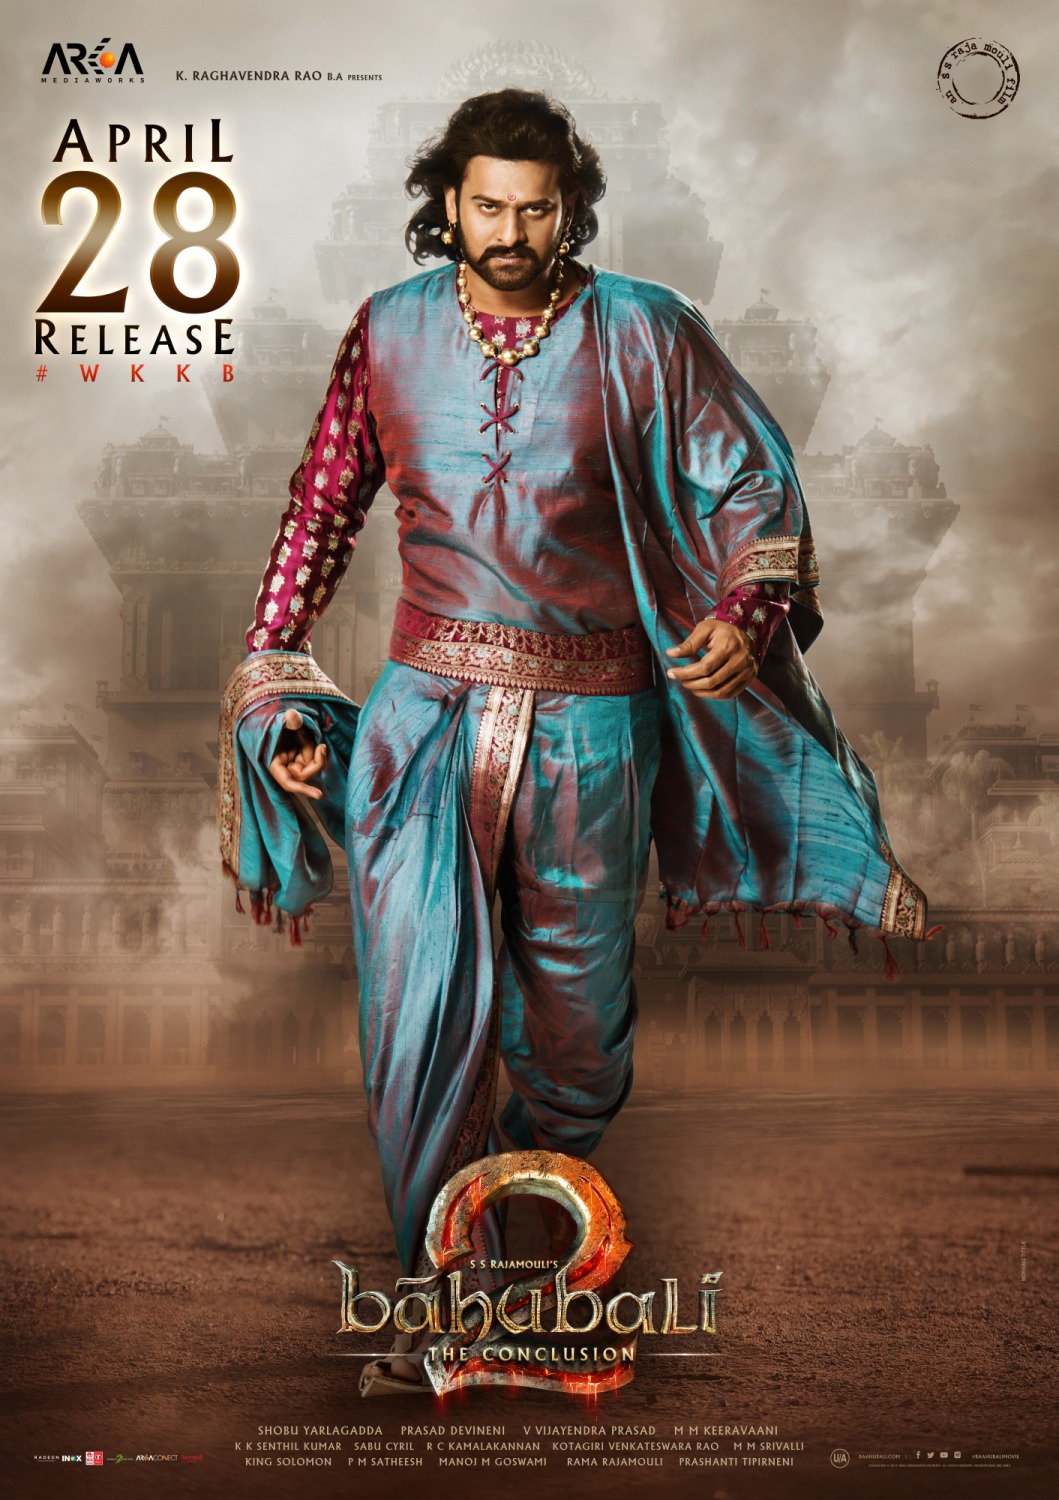 Extra Large Movie Poster Image for Baahubali 2: The Conclusion (#8 of 12)